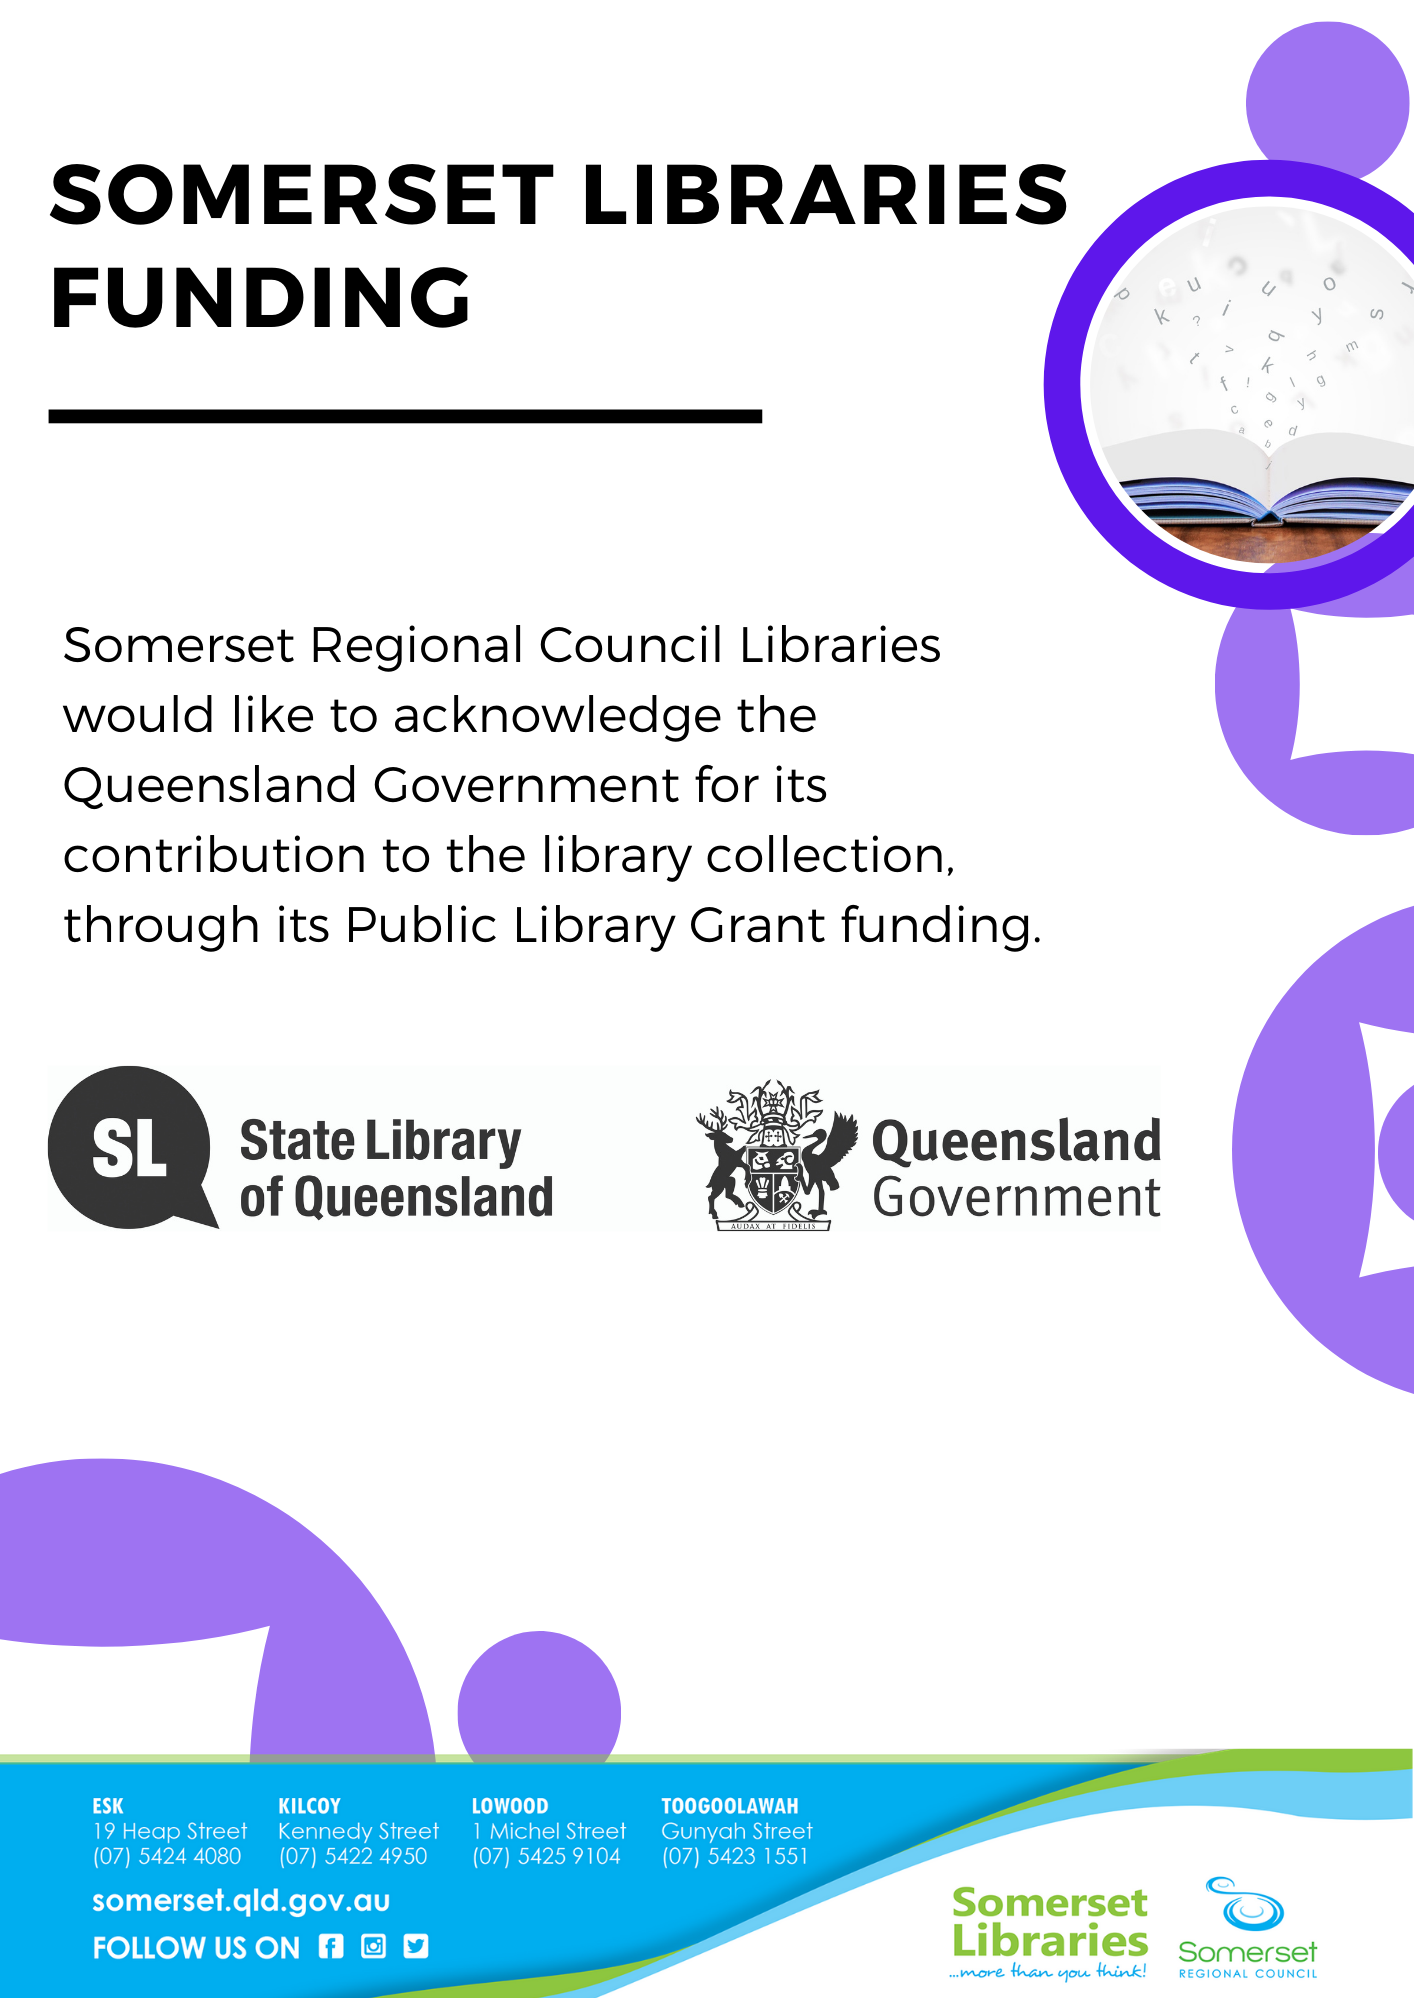 Somerset Libraries
Funding: Somerset Regional Council Libraries would like to acknowledge the Queensland Government for its contribution to the library collection, through its Public Library Grant funding.
State Library of Queensland